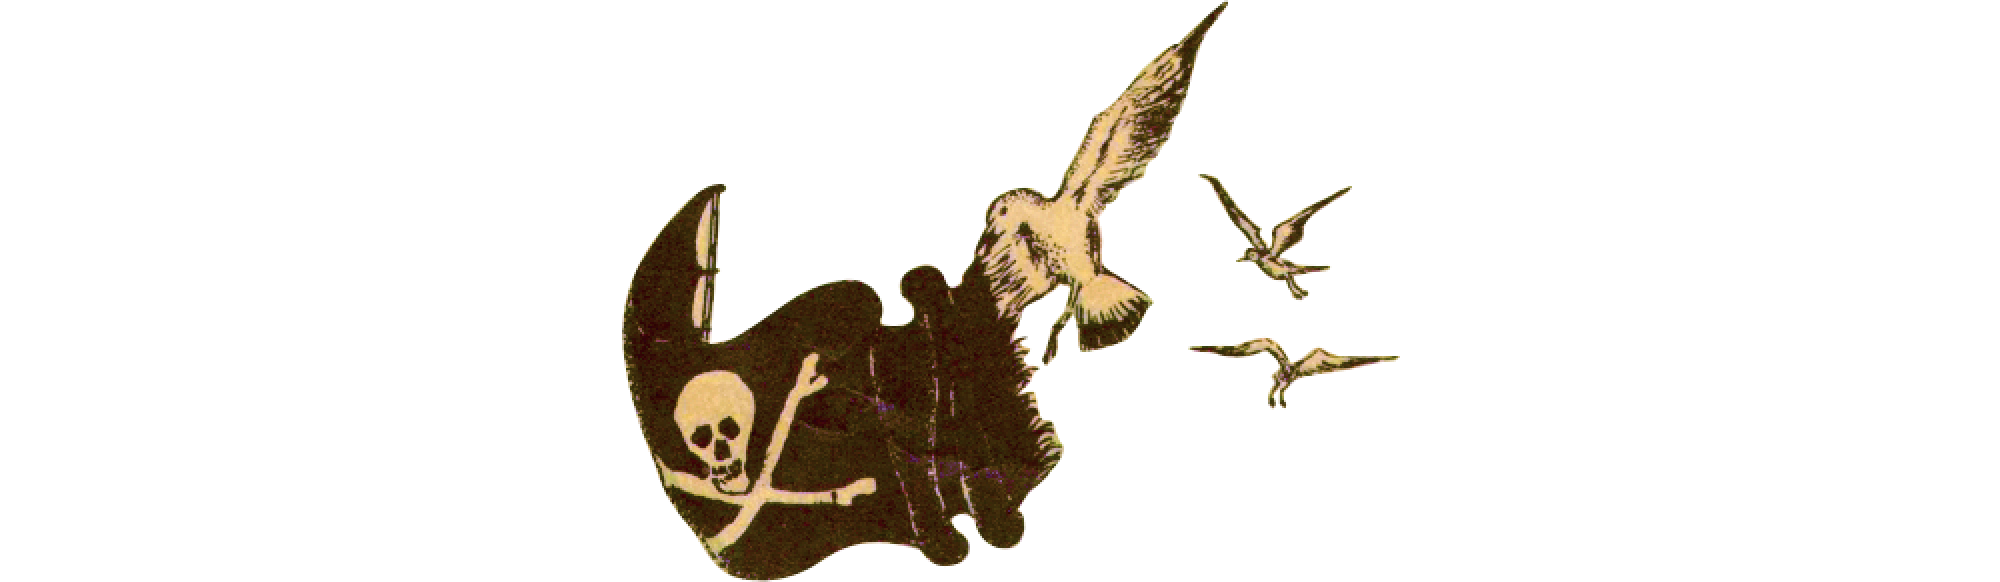 illustration of pirate flag being waved by three gulls